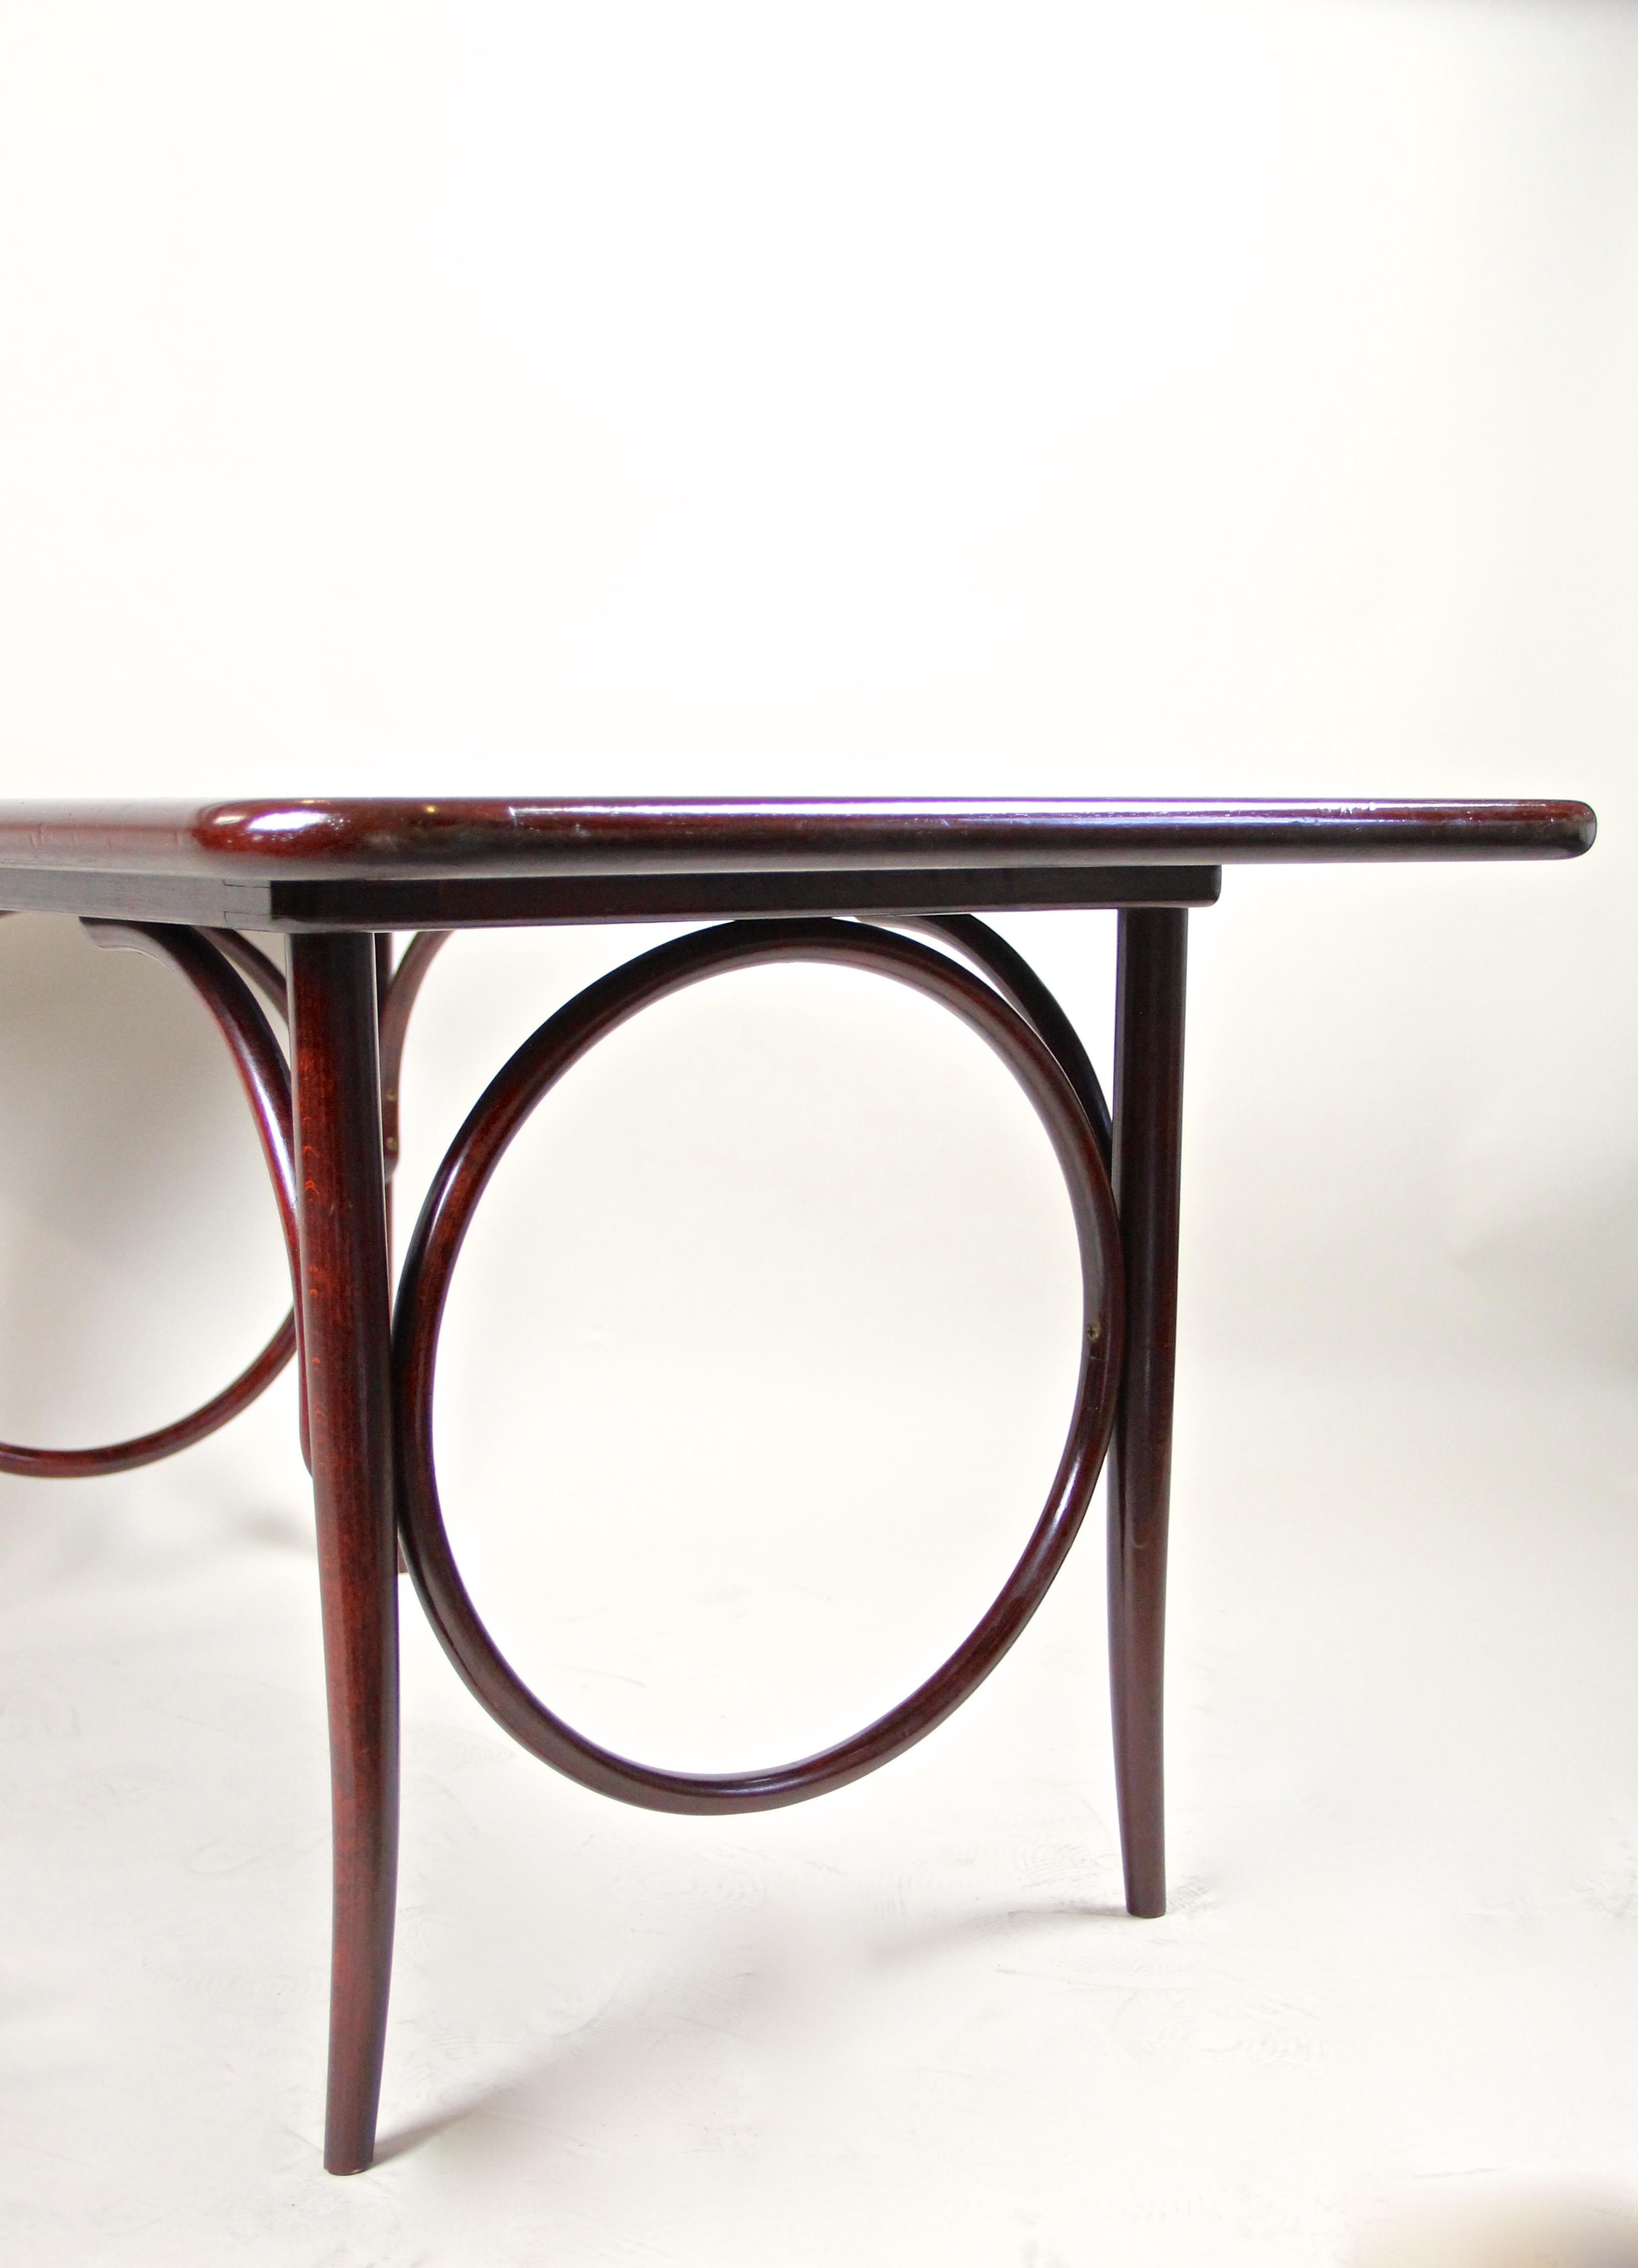 Vintage Thonet Sofa Table with Ring Design, Austria, circa 1970 For Sale 4